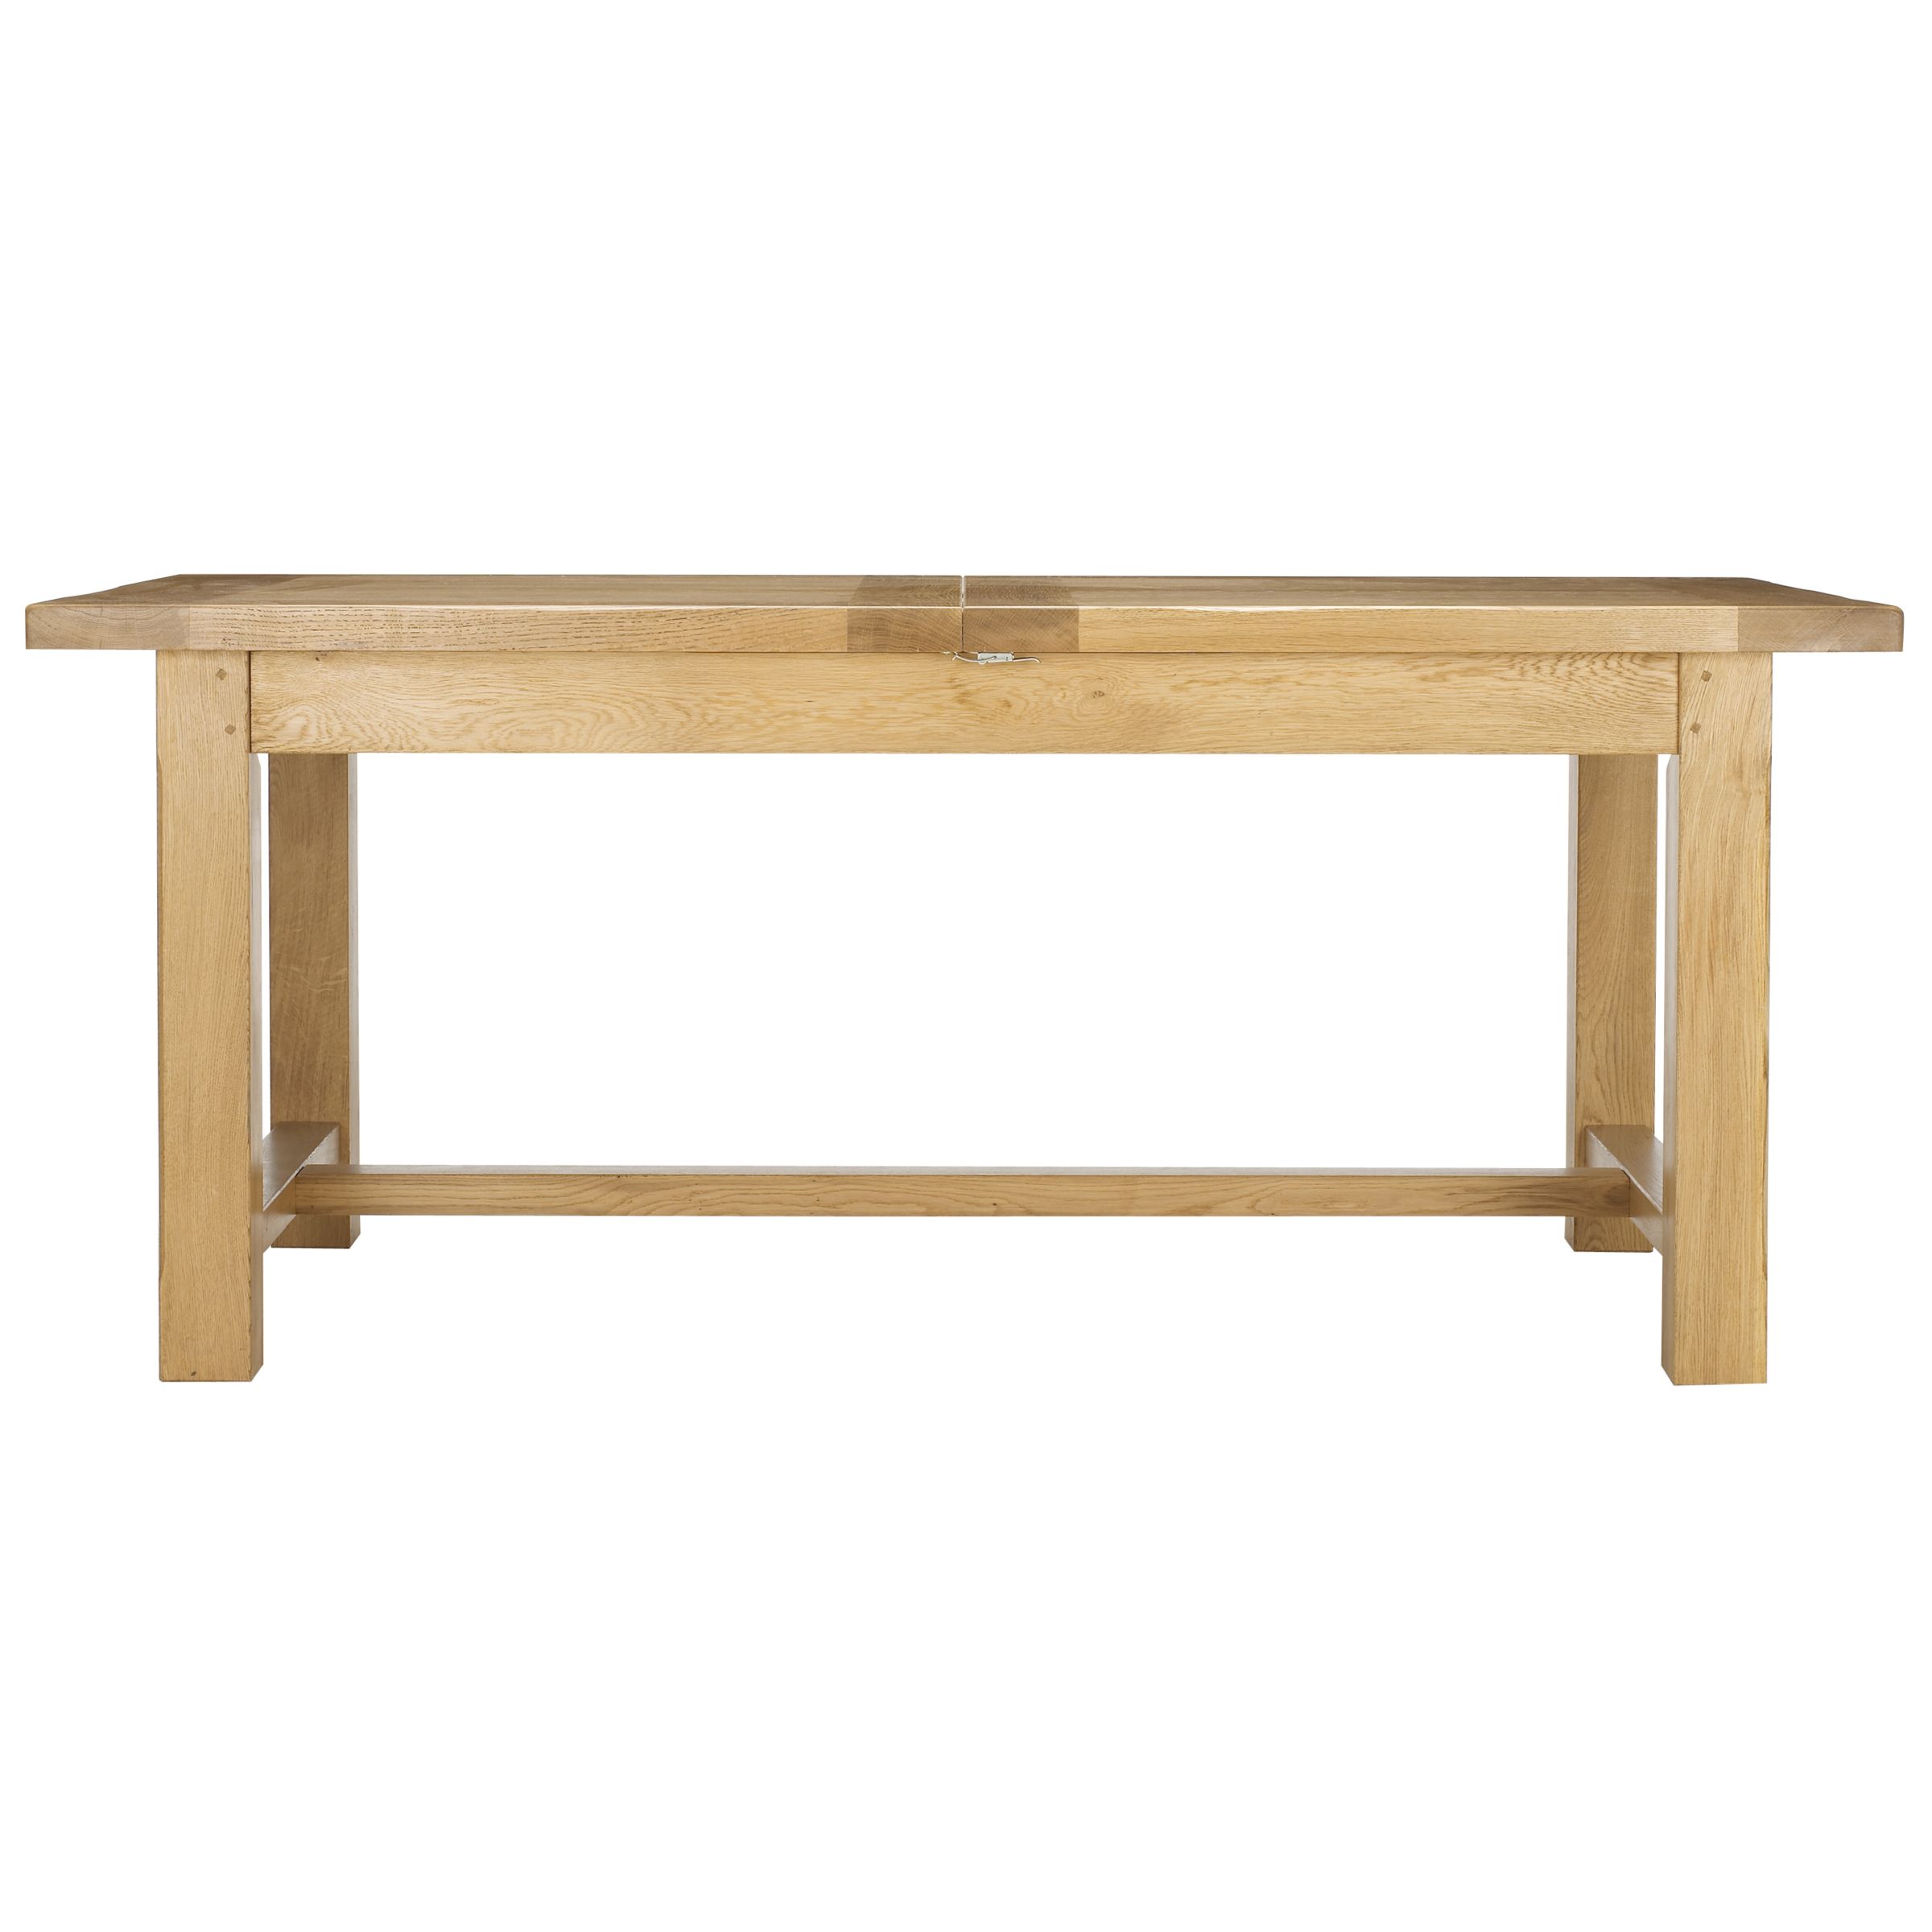 Ardennes Extending Refectory Table, L180-230cm, Sarlat at John Lewis